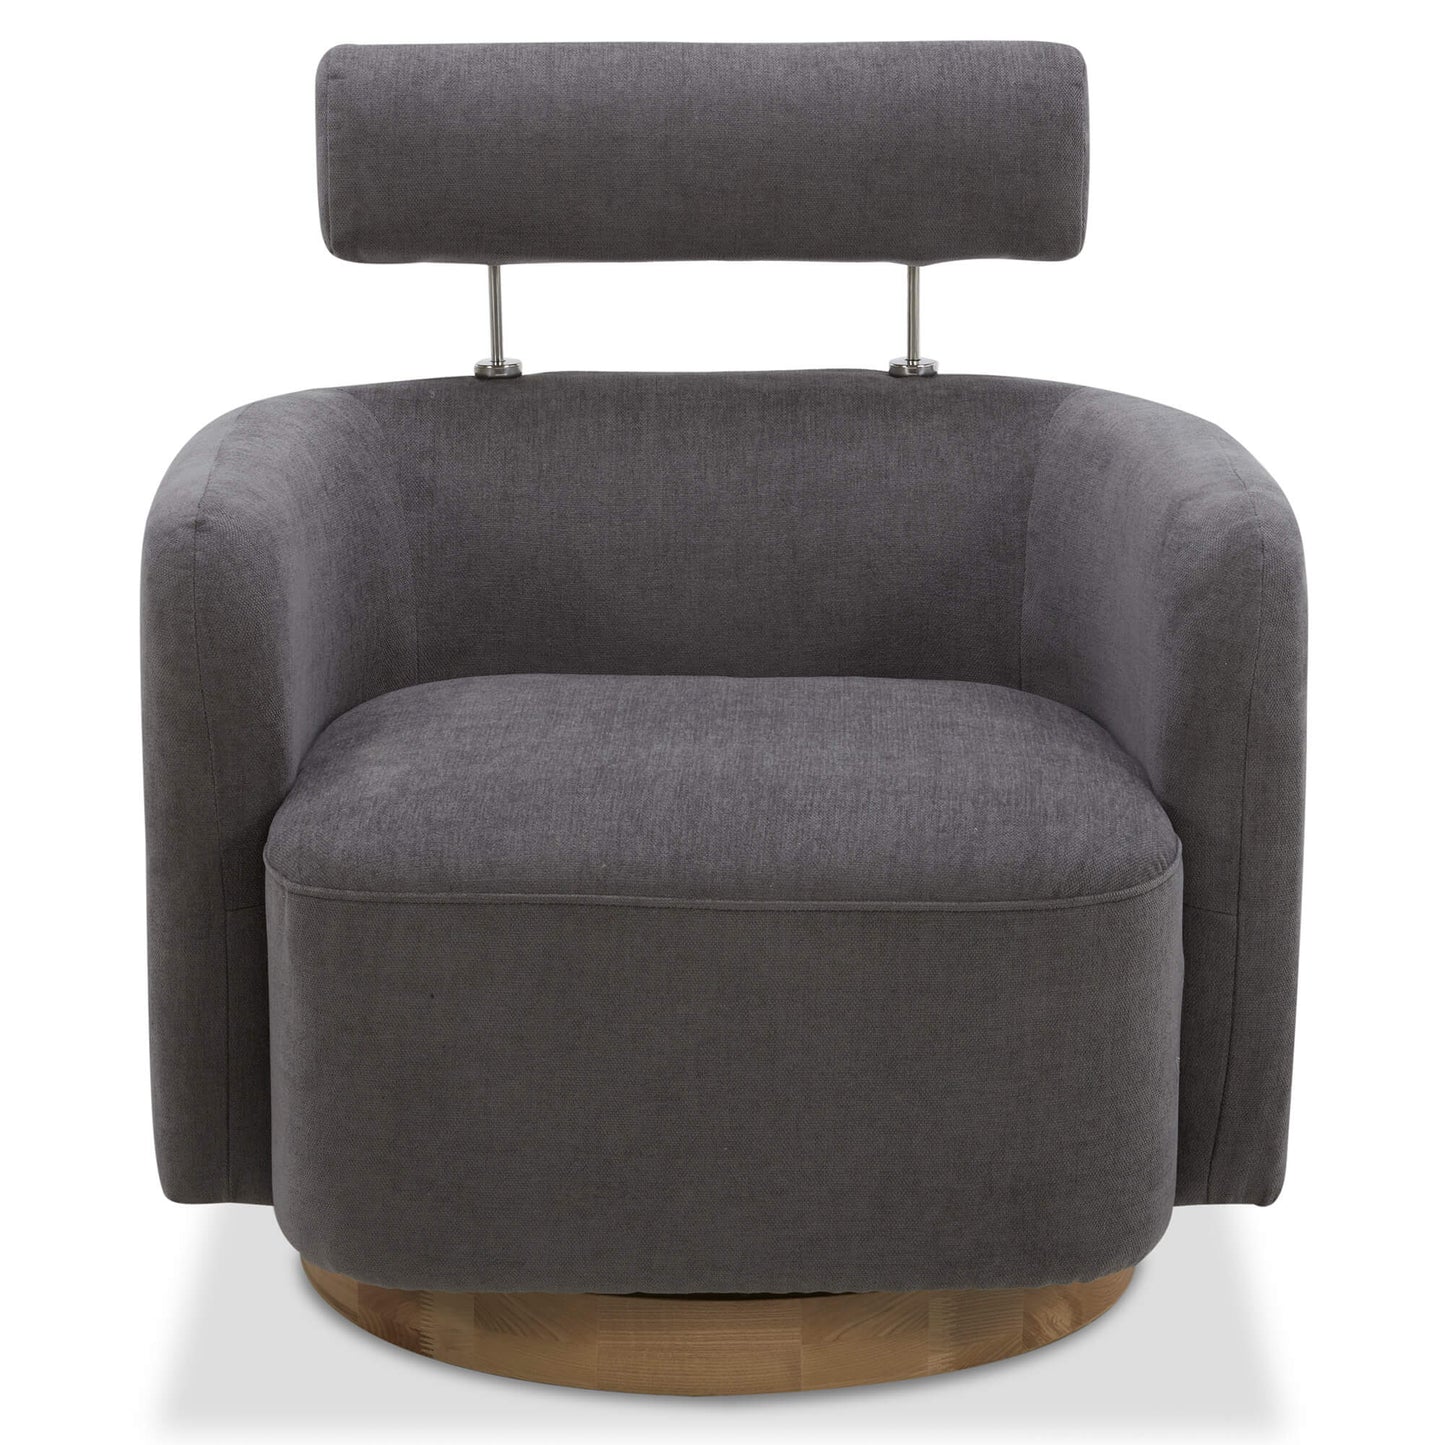 CHITA LIVING-Luna Swivel Accent Chair With Adjustable Backrest-Accent Chair-Fabric-Dark Gray-